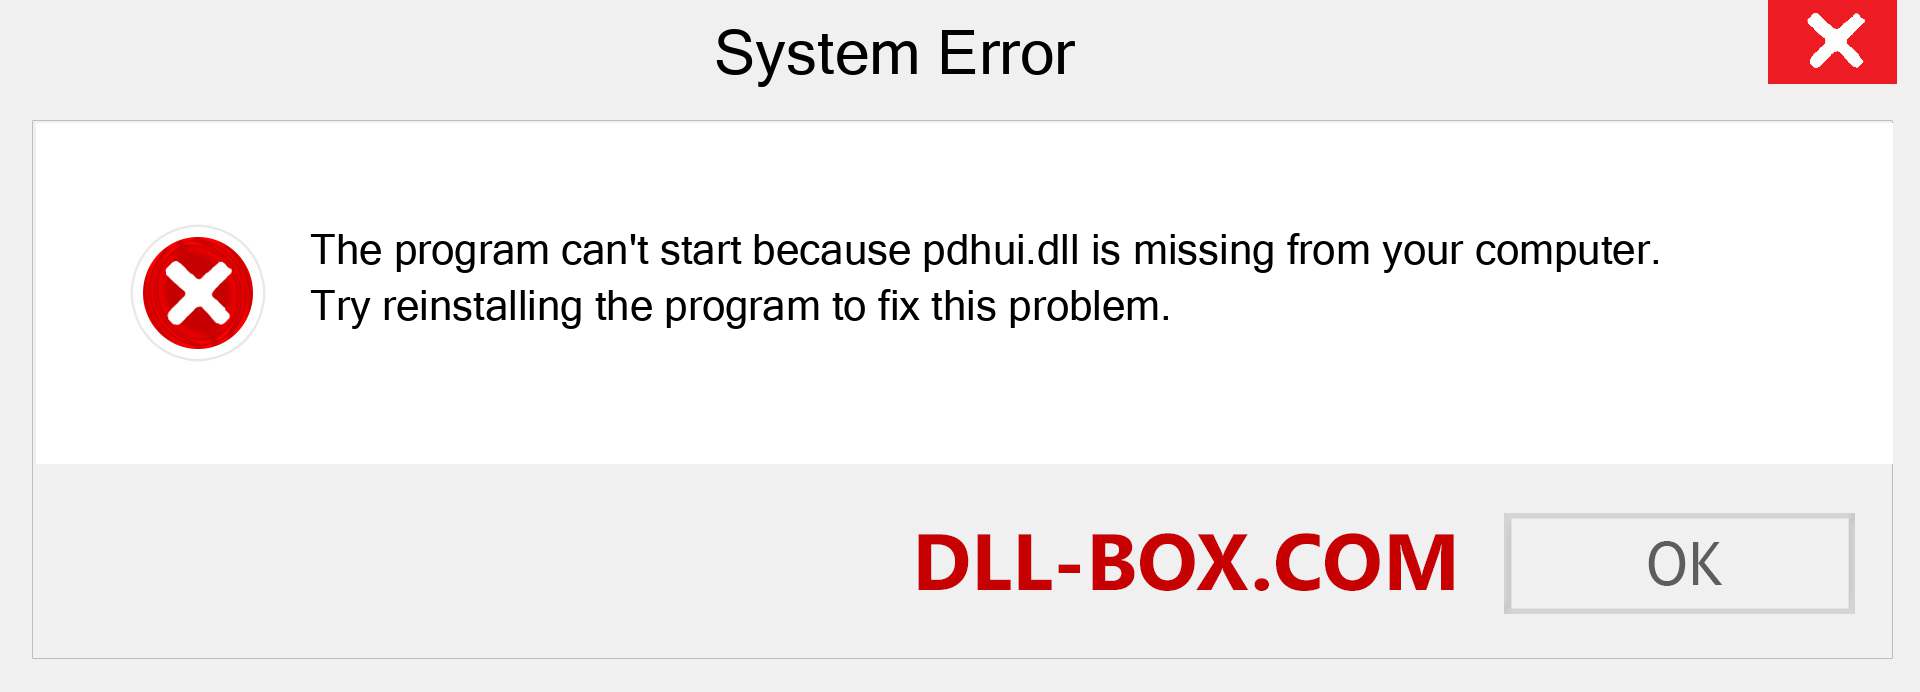  pdhui.dll file is missing?. Download for Windows 7, 8, 10 - Fix  pdhui dll Missing Error on Windows, photos, images